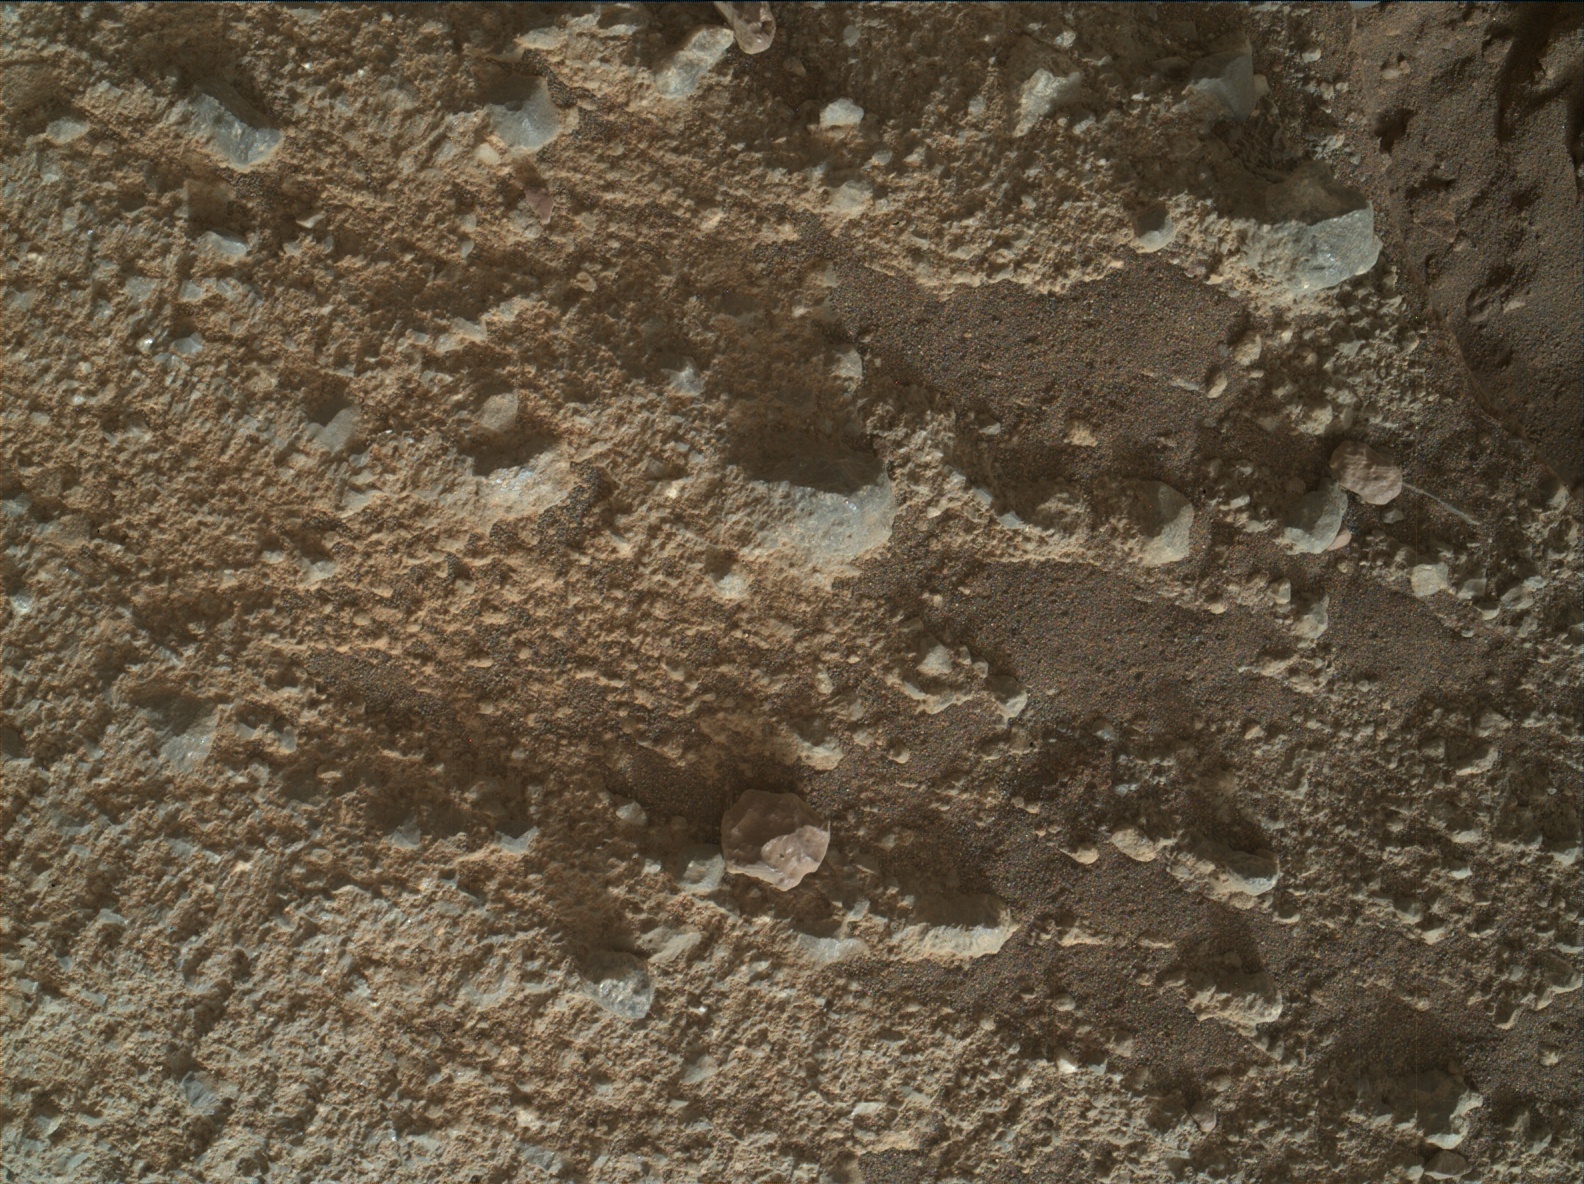 Nasa's Mars rover Curiosity acquired this image using its Mars Hand Lens Imager (MAHLI) on Sol 2023